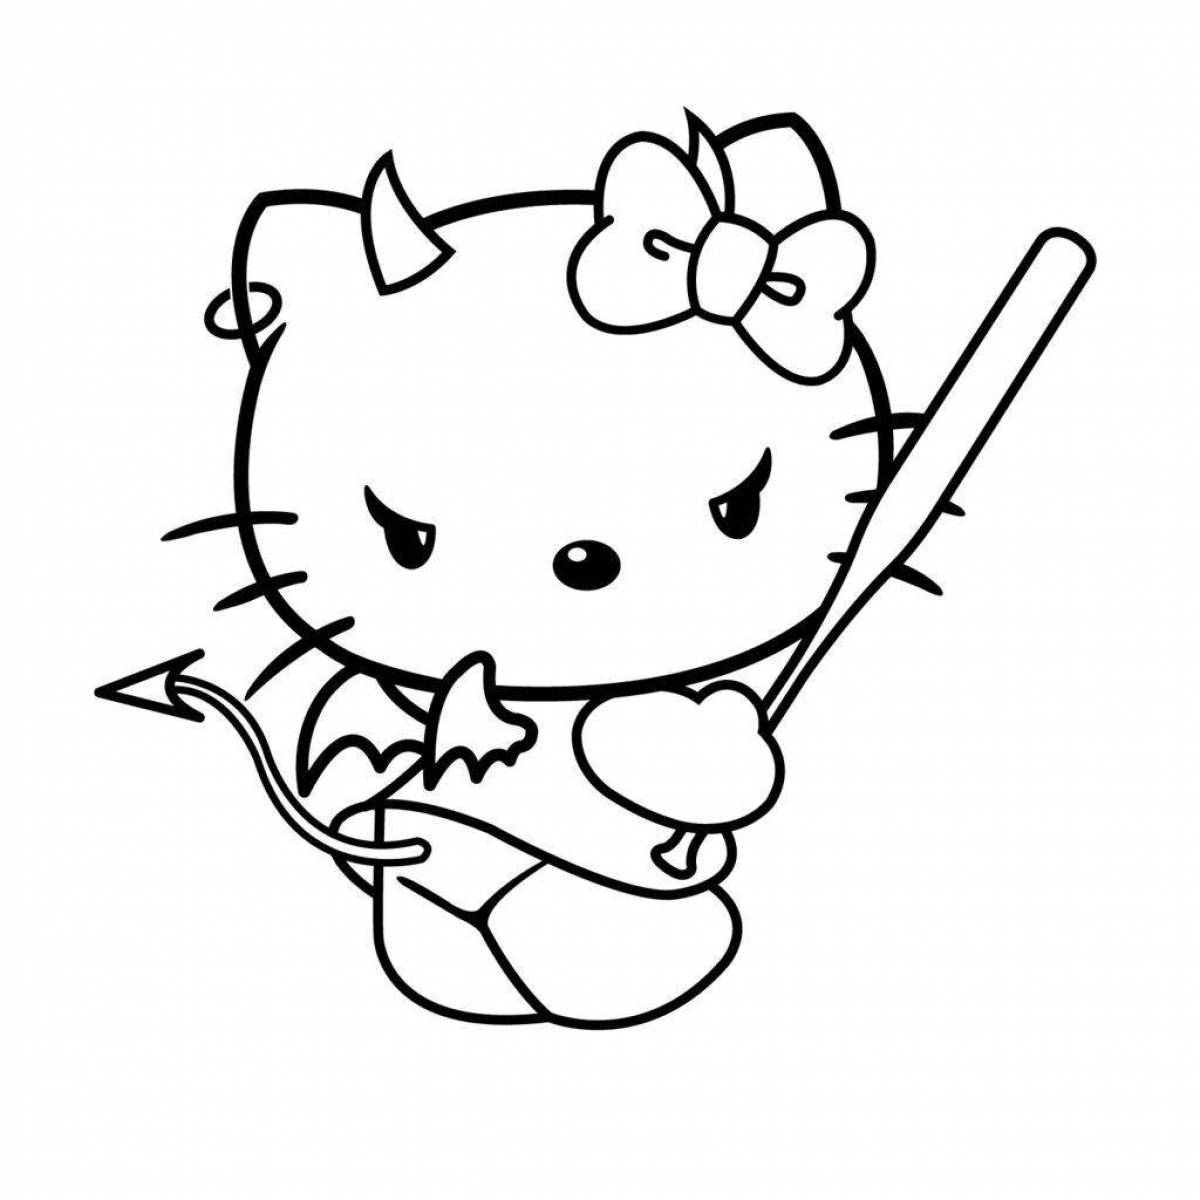 Fabulous hello kitty demon coloring page